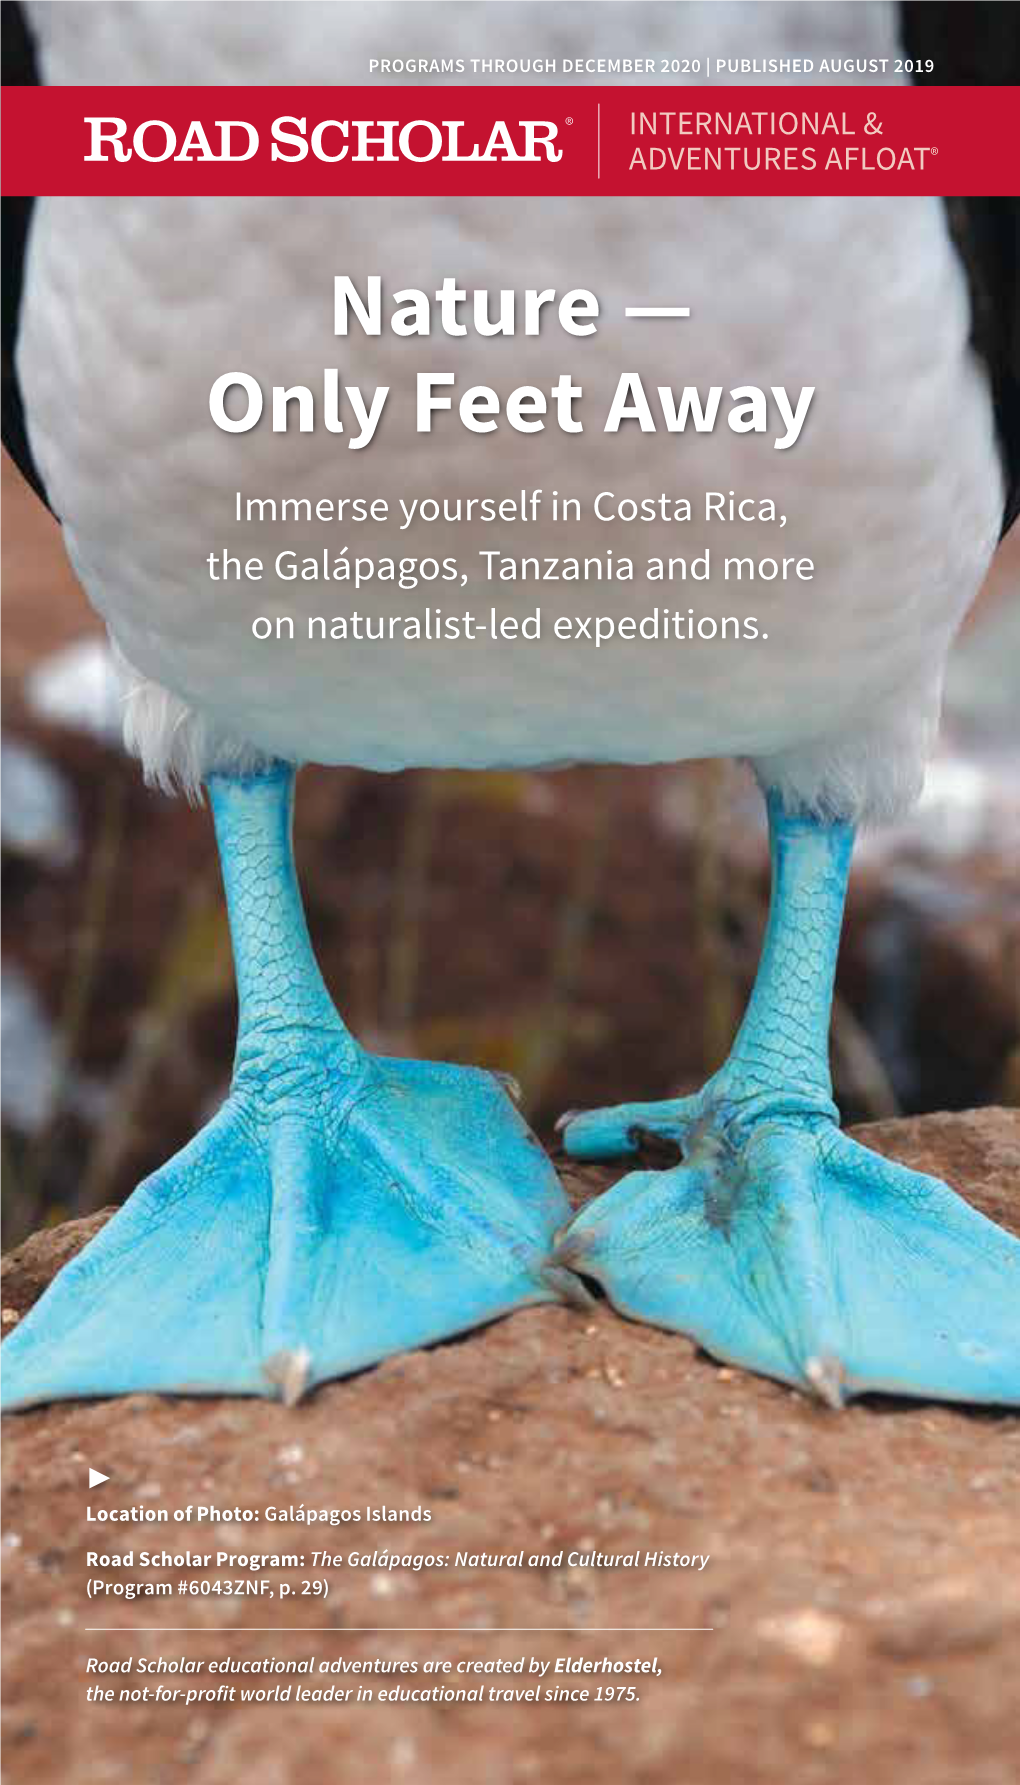 Nature — Only Feet Away Immerse Yourself in Costa Rica, the Galápagos, Tanzania and More on Naturalist-Led Expeditions